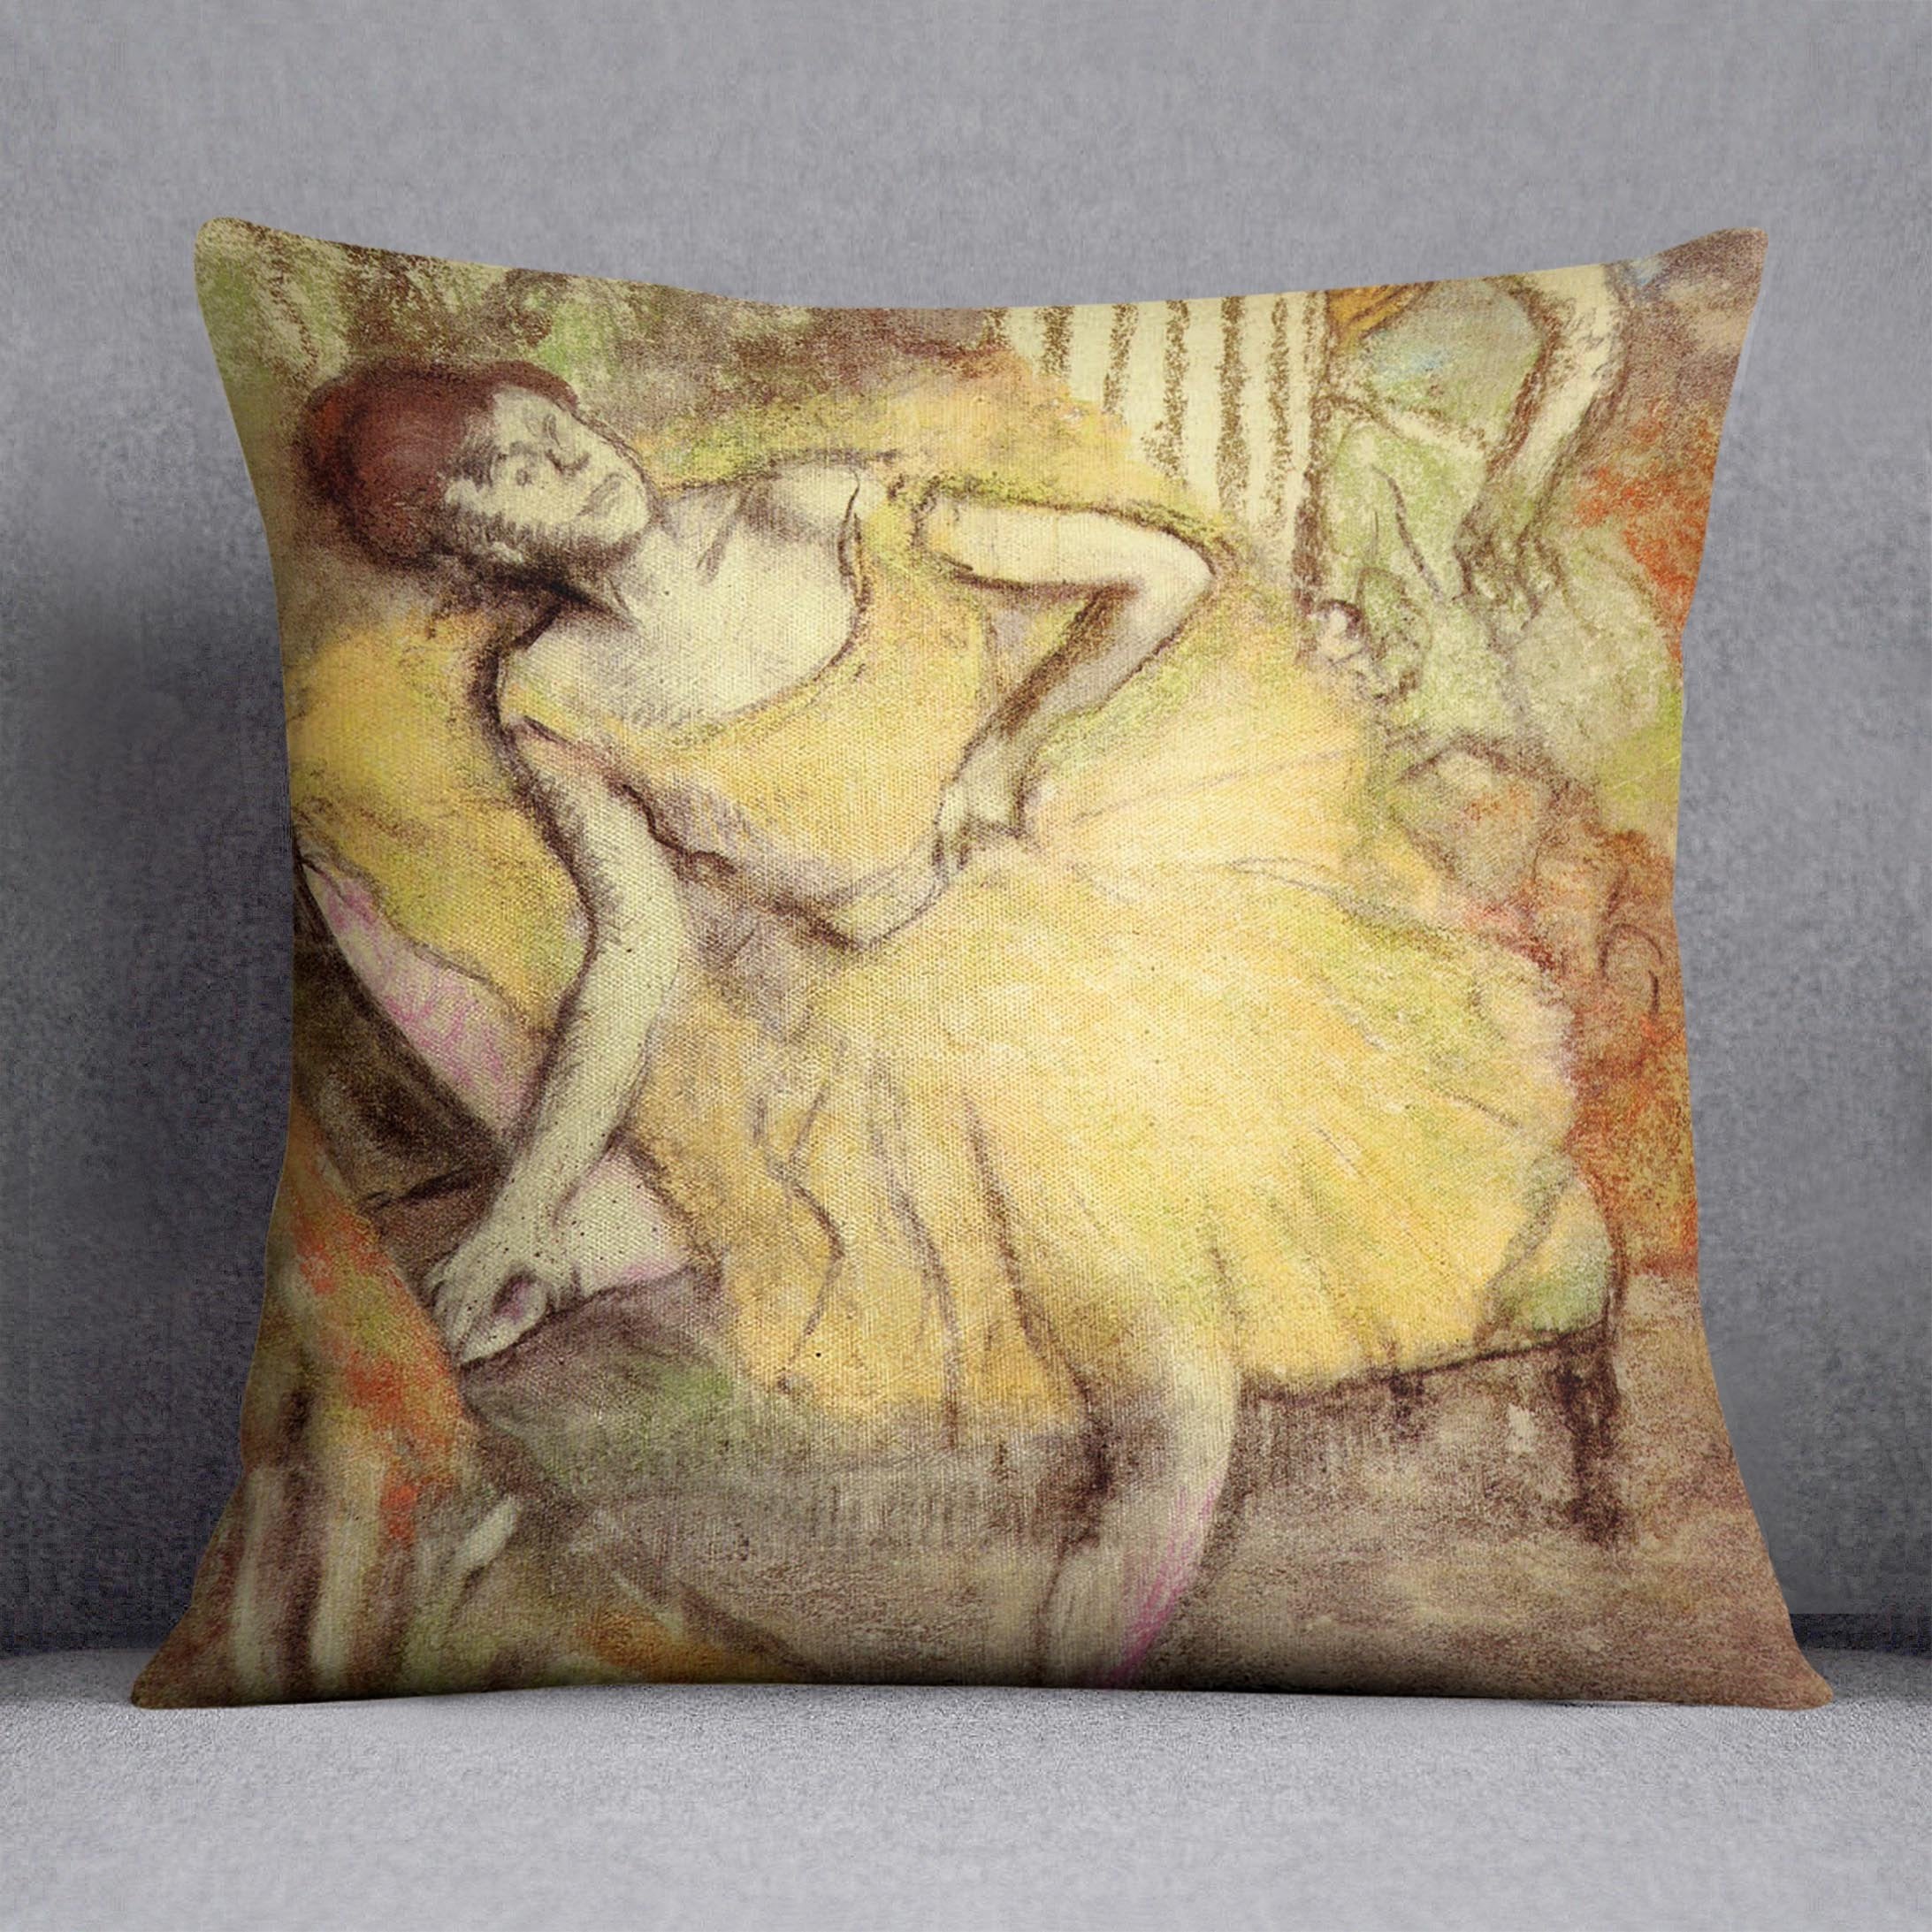 Sitting dancer with the right leg up by Degas Cushion